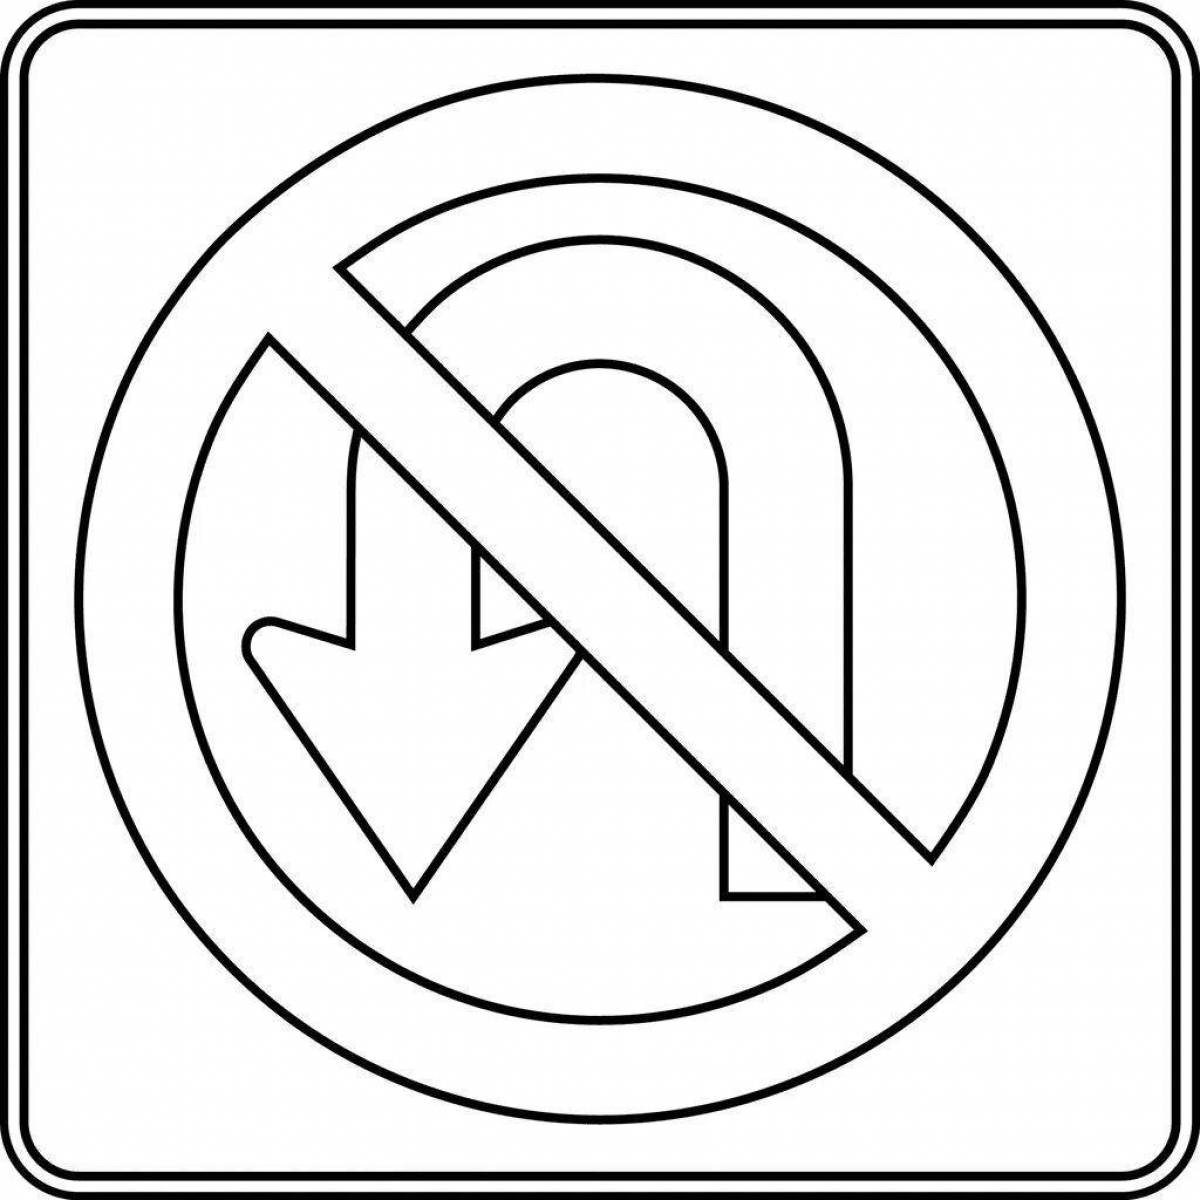 Impassable parking sign coloring page